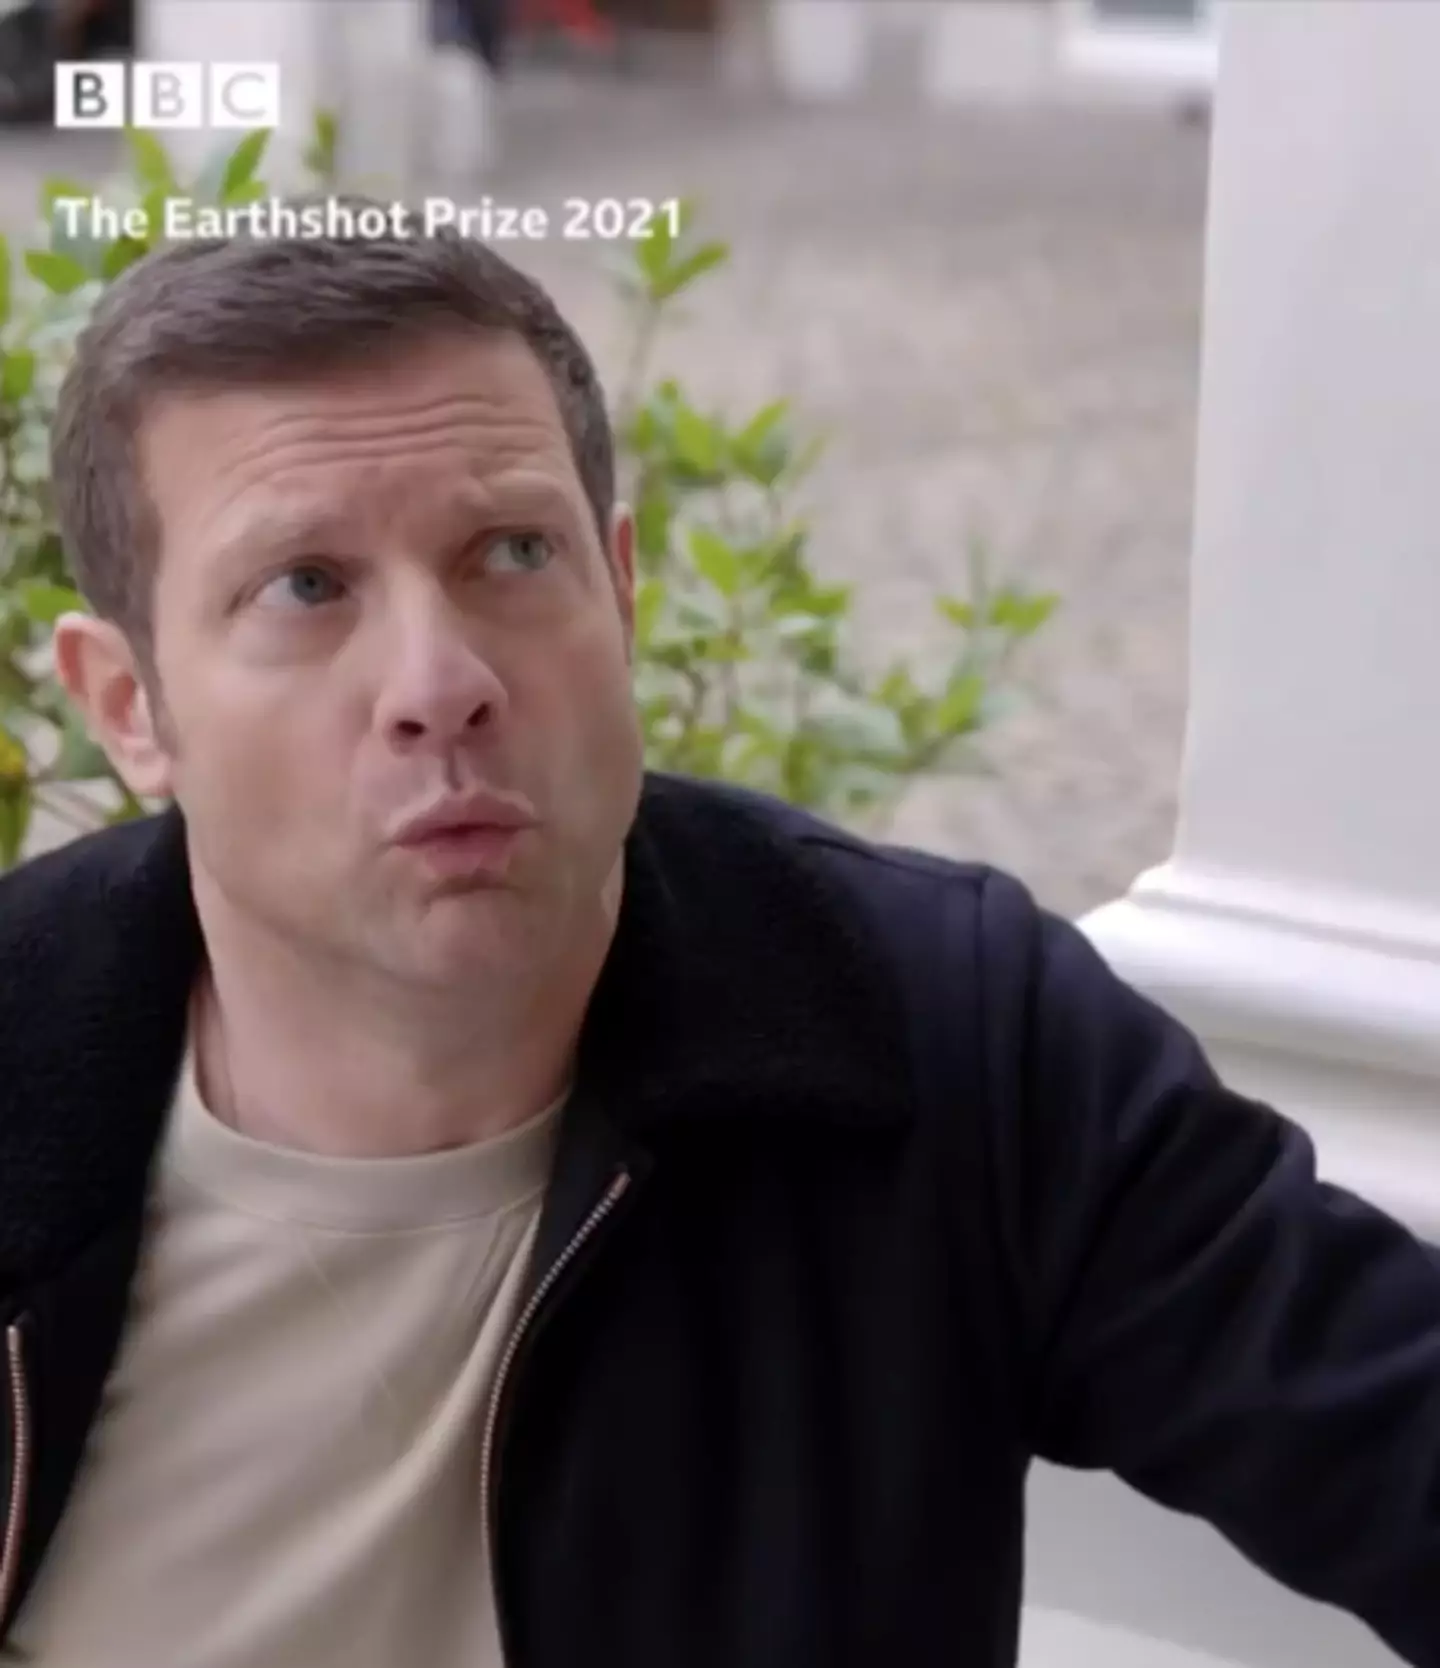 Dermot O'Leary will also feature (